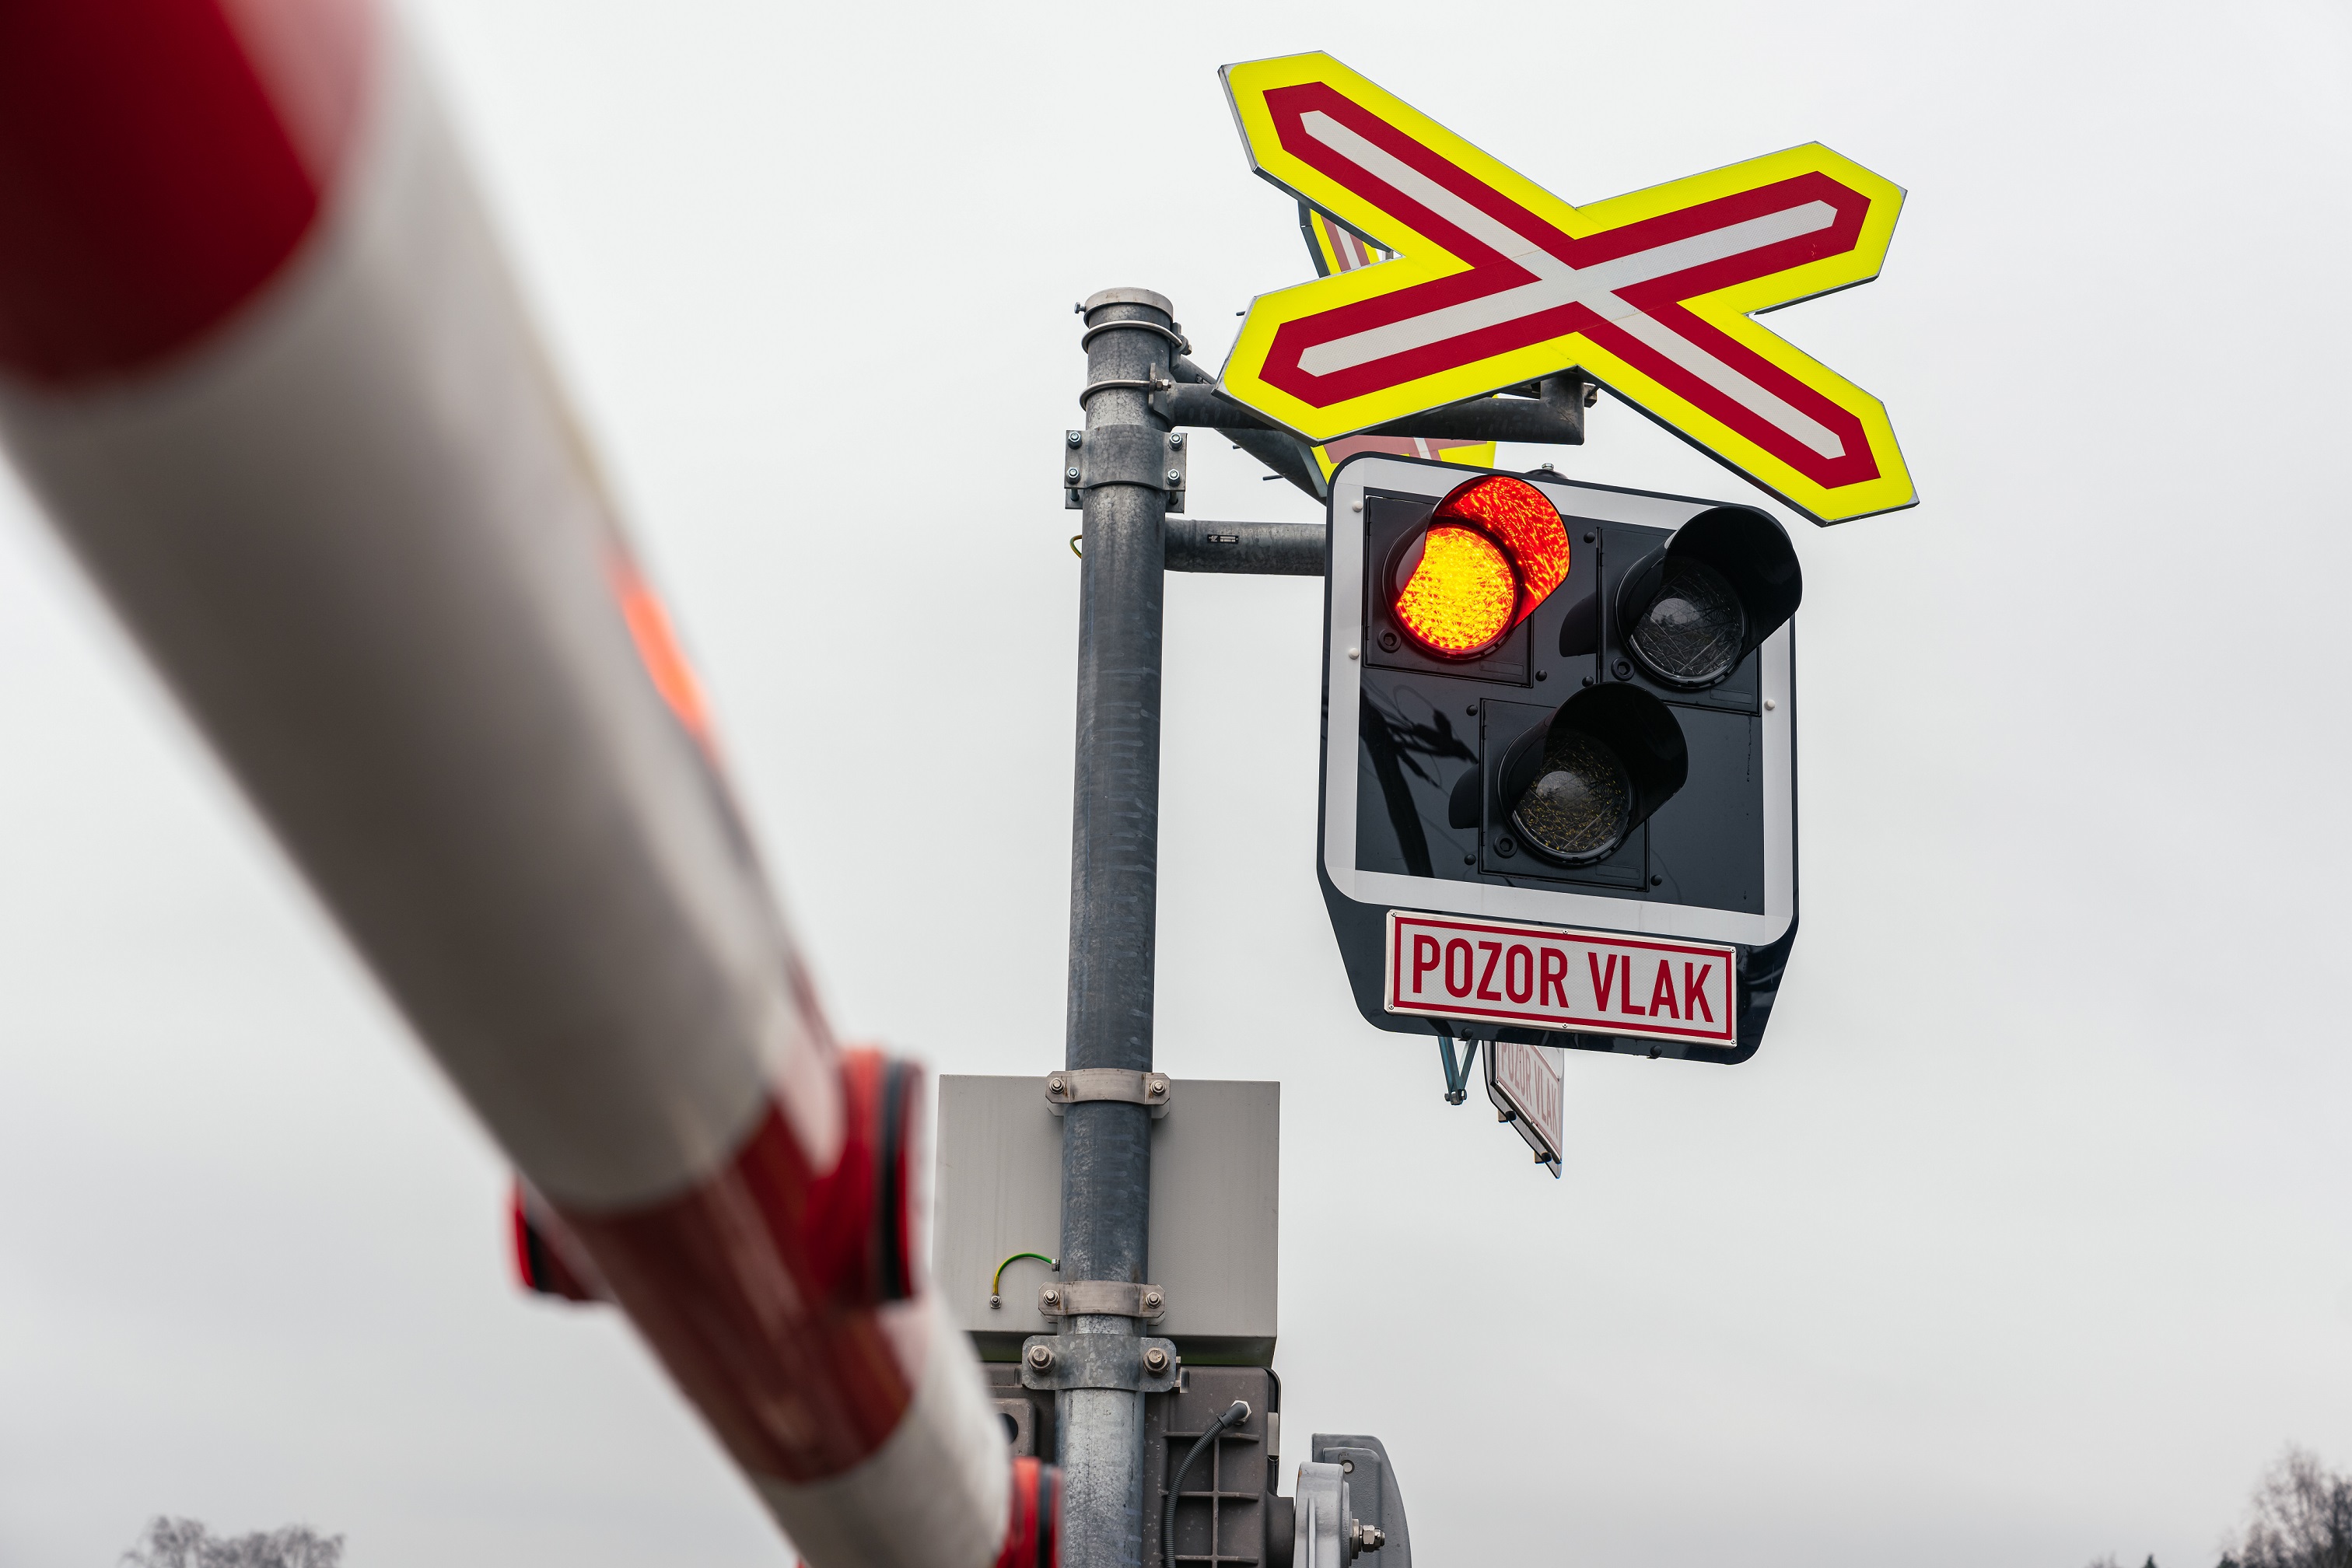 Last year the Czech railway infrastructure manager, modernised the most level crossings in history